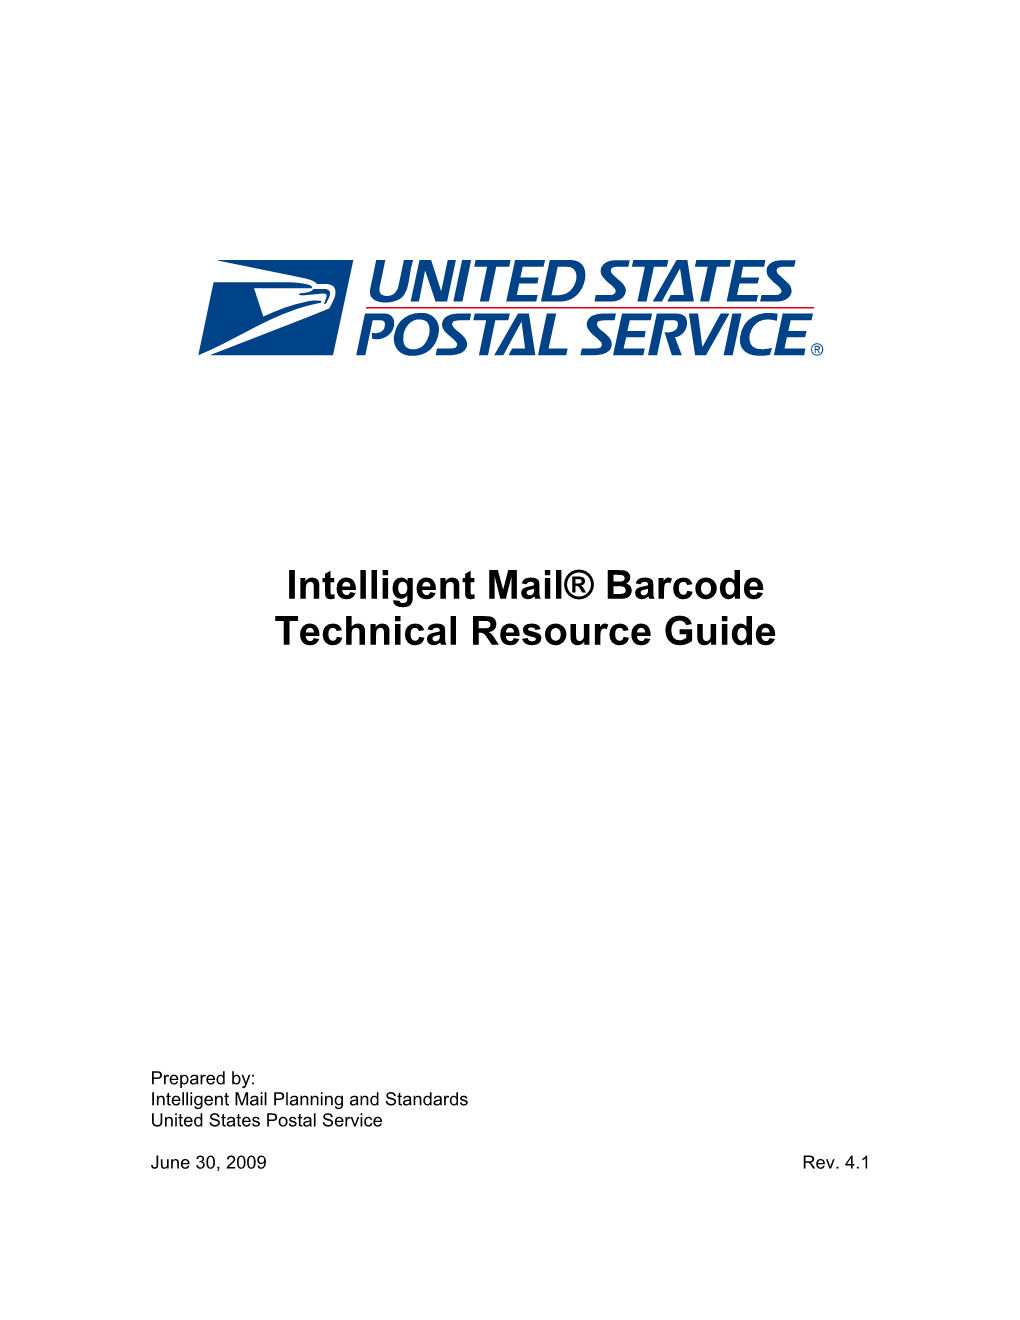 Intelligent Mail Barcode Technical Resource Guide